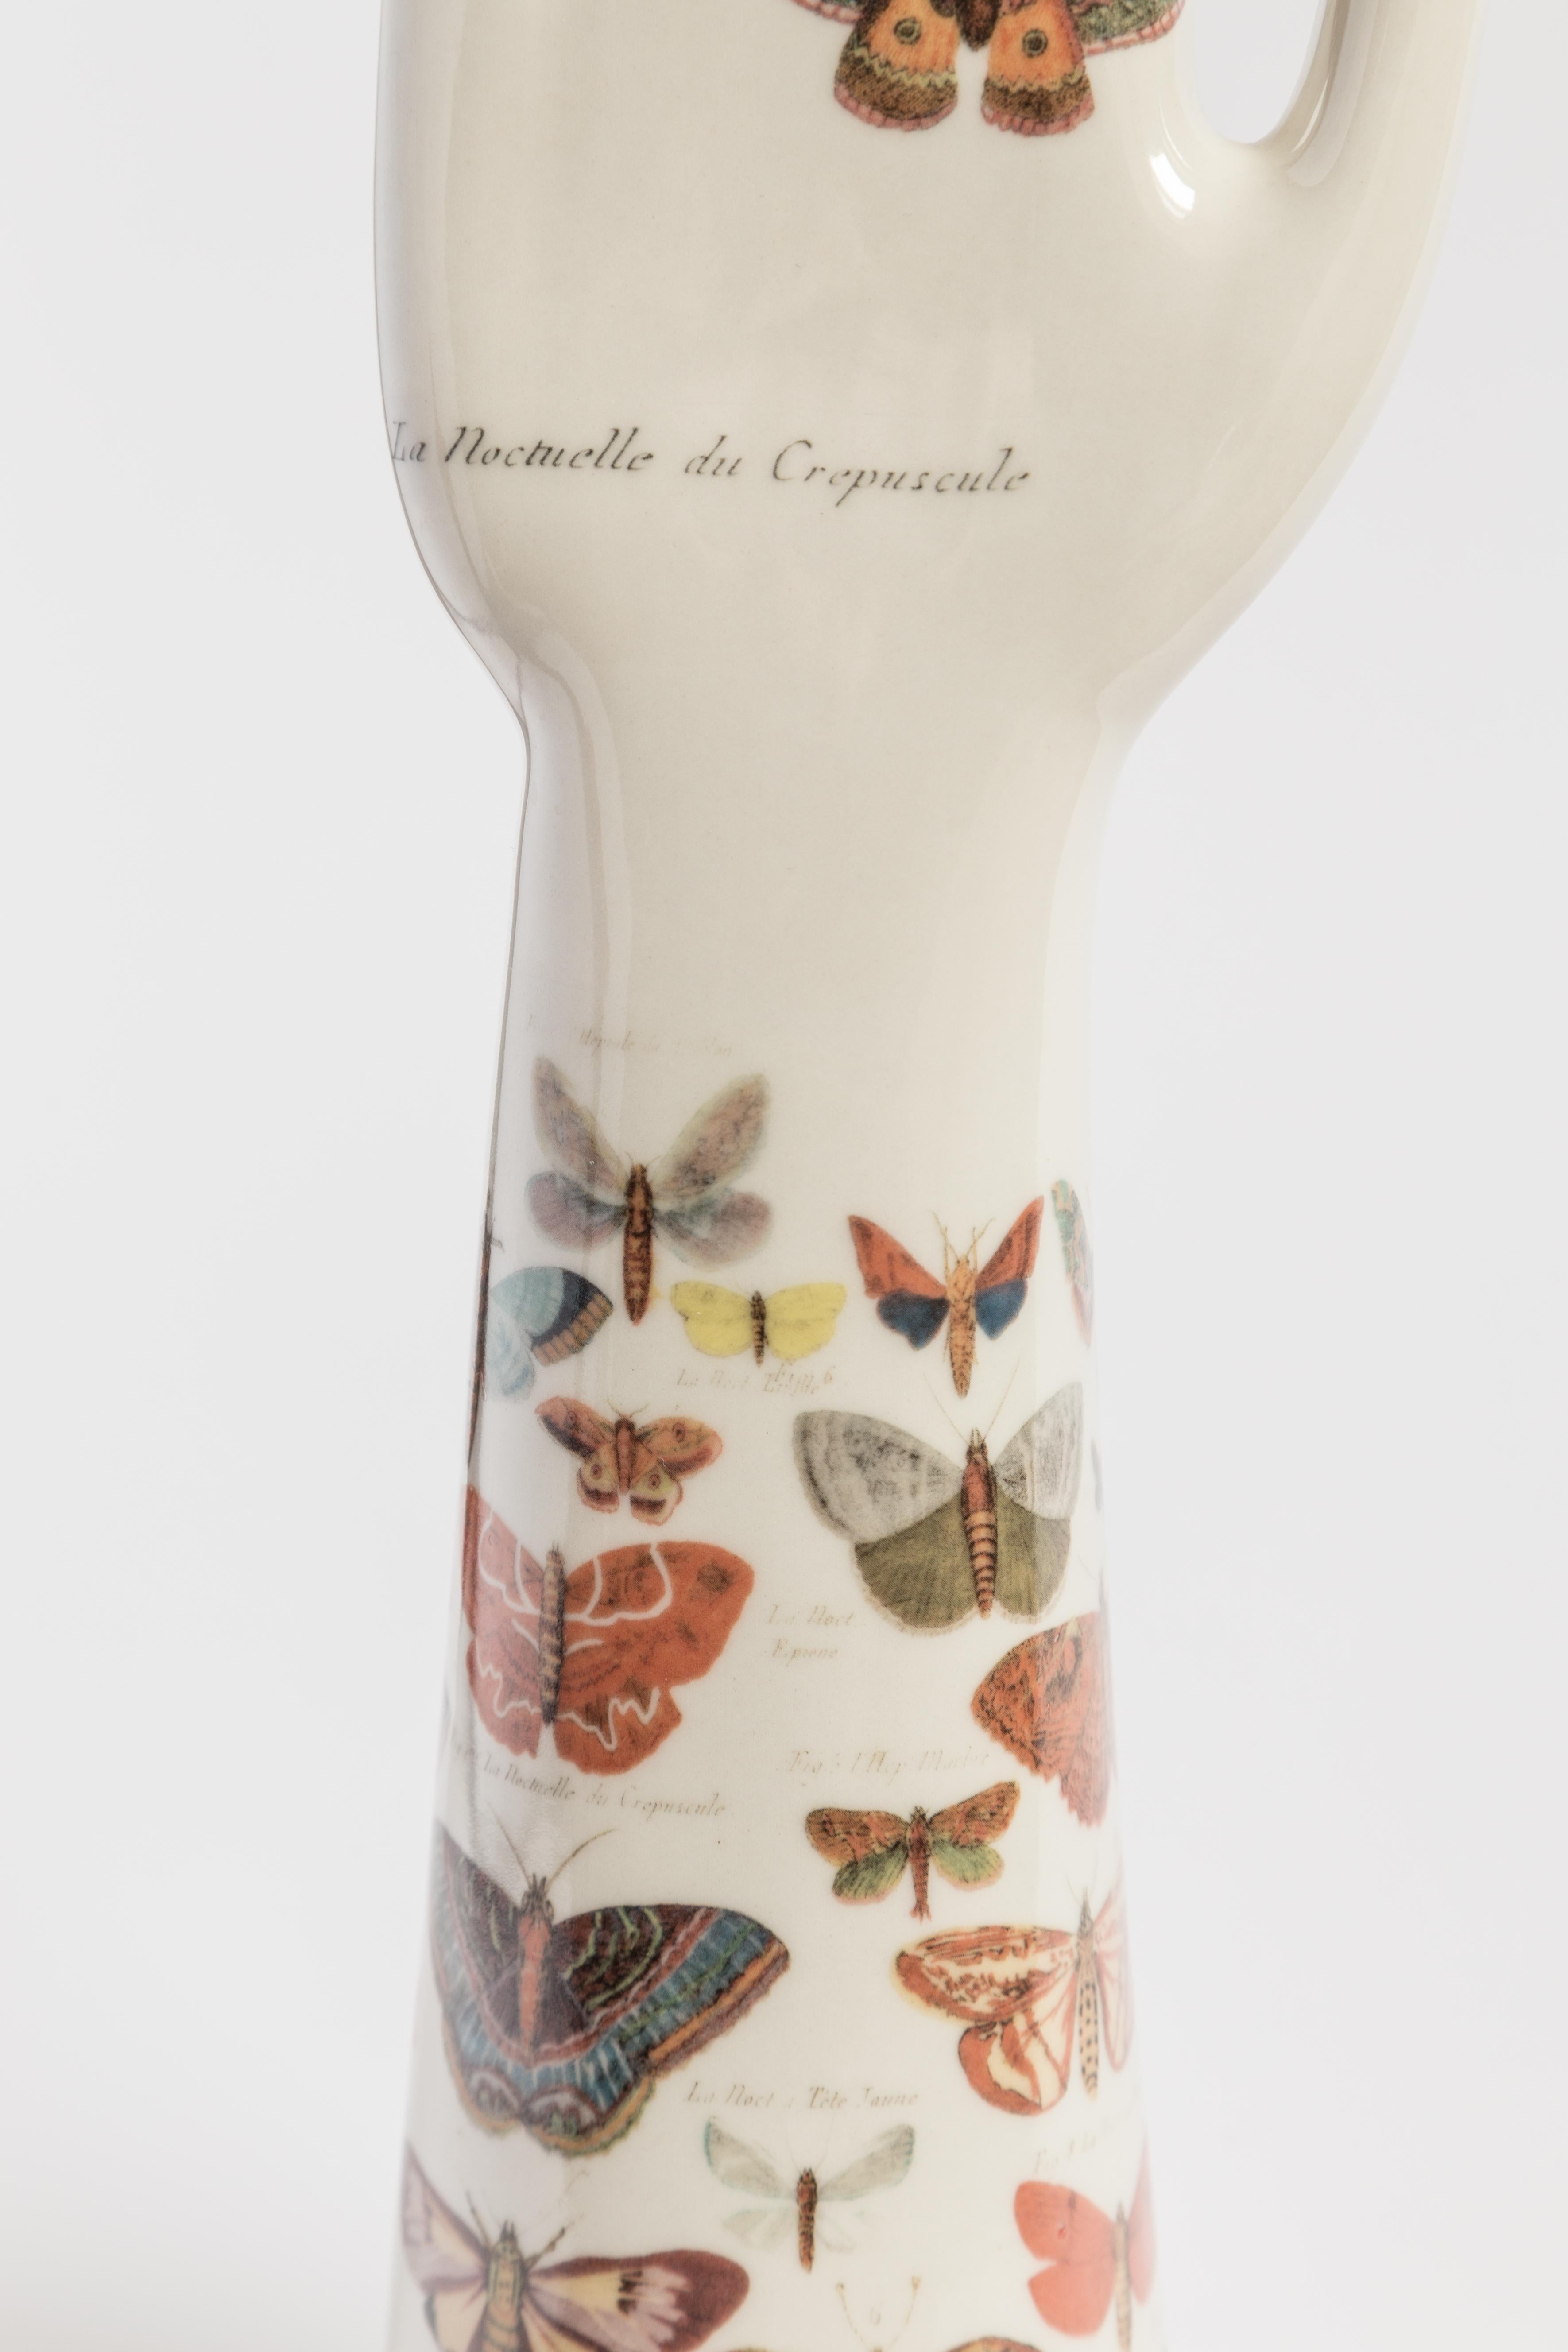 Italian Anatomica, Porcelain Hand with Butterflies Decoration by Vito Nesta For Sale